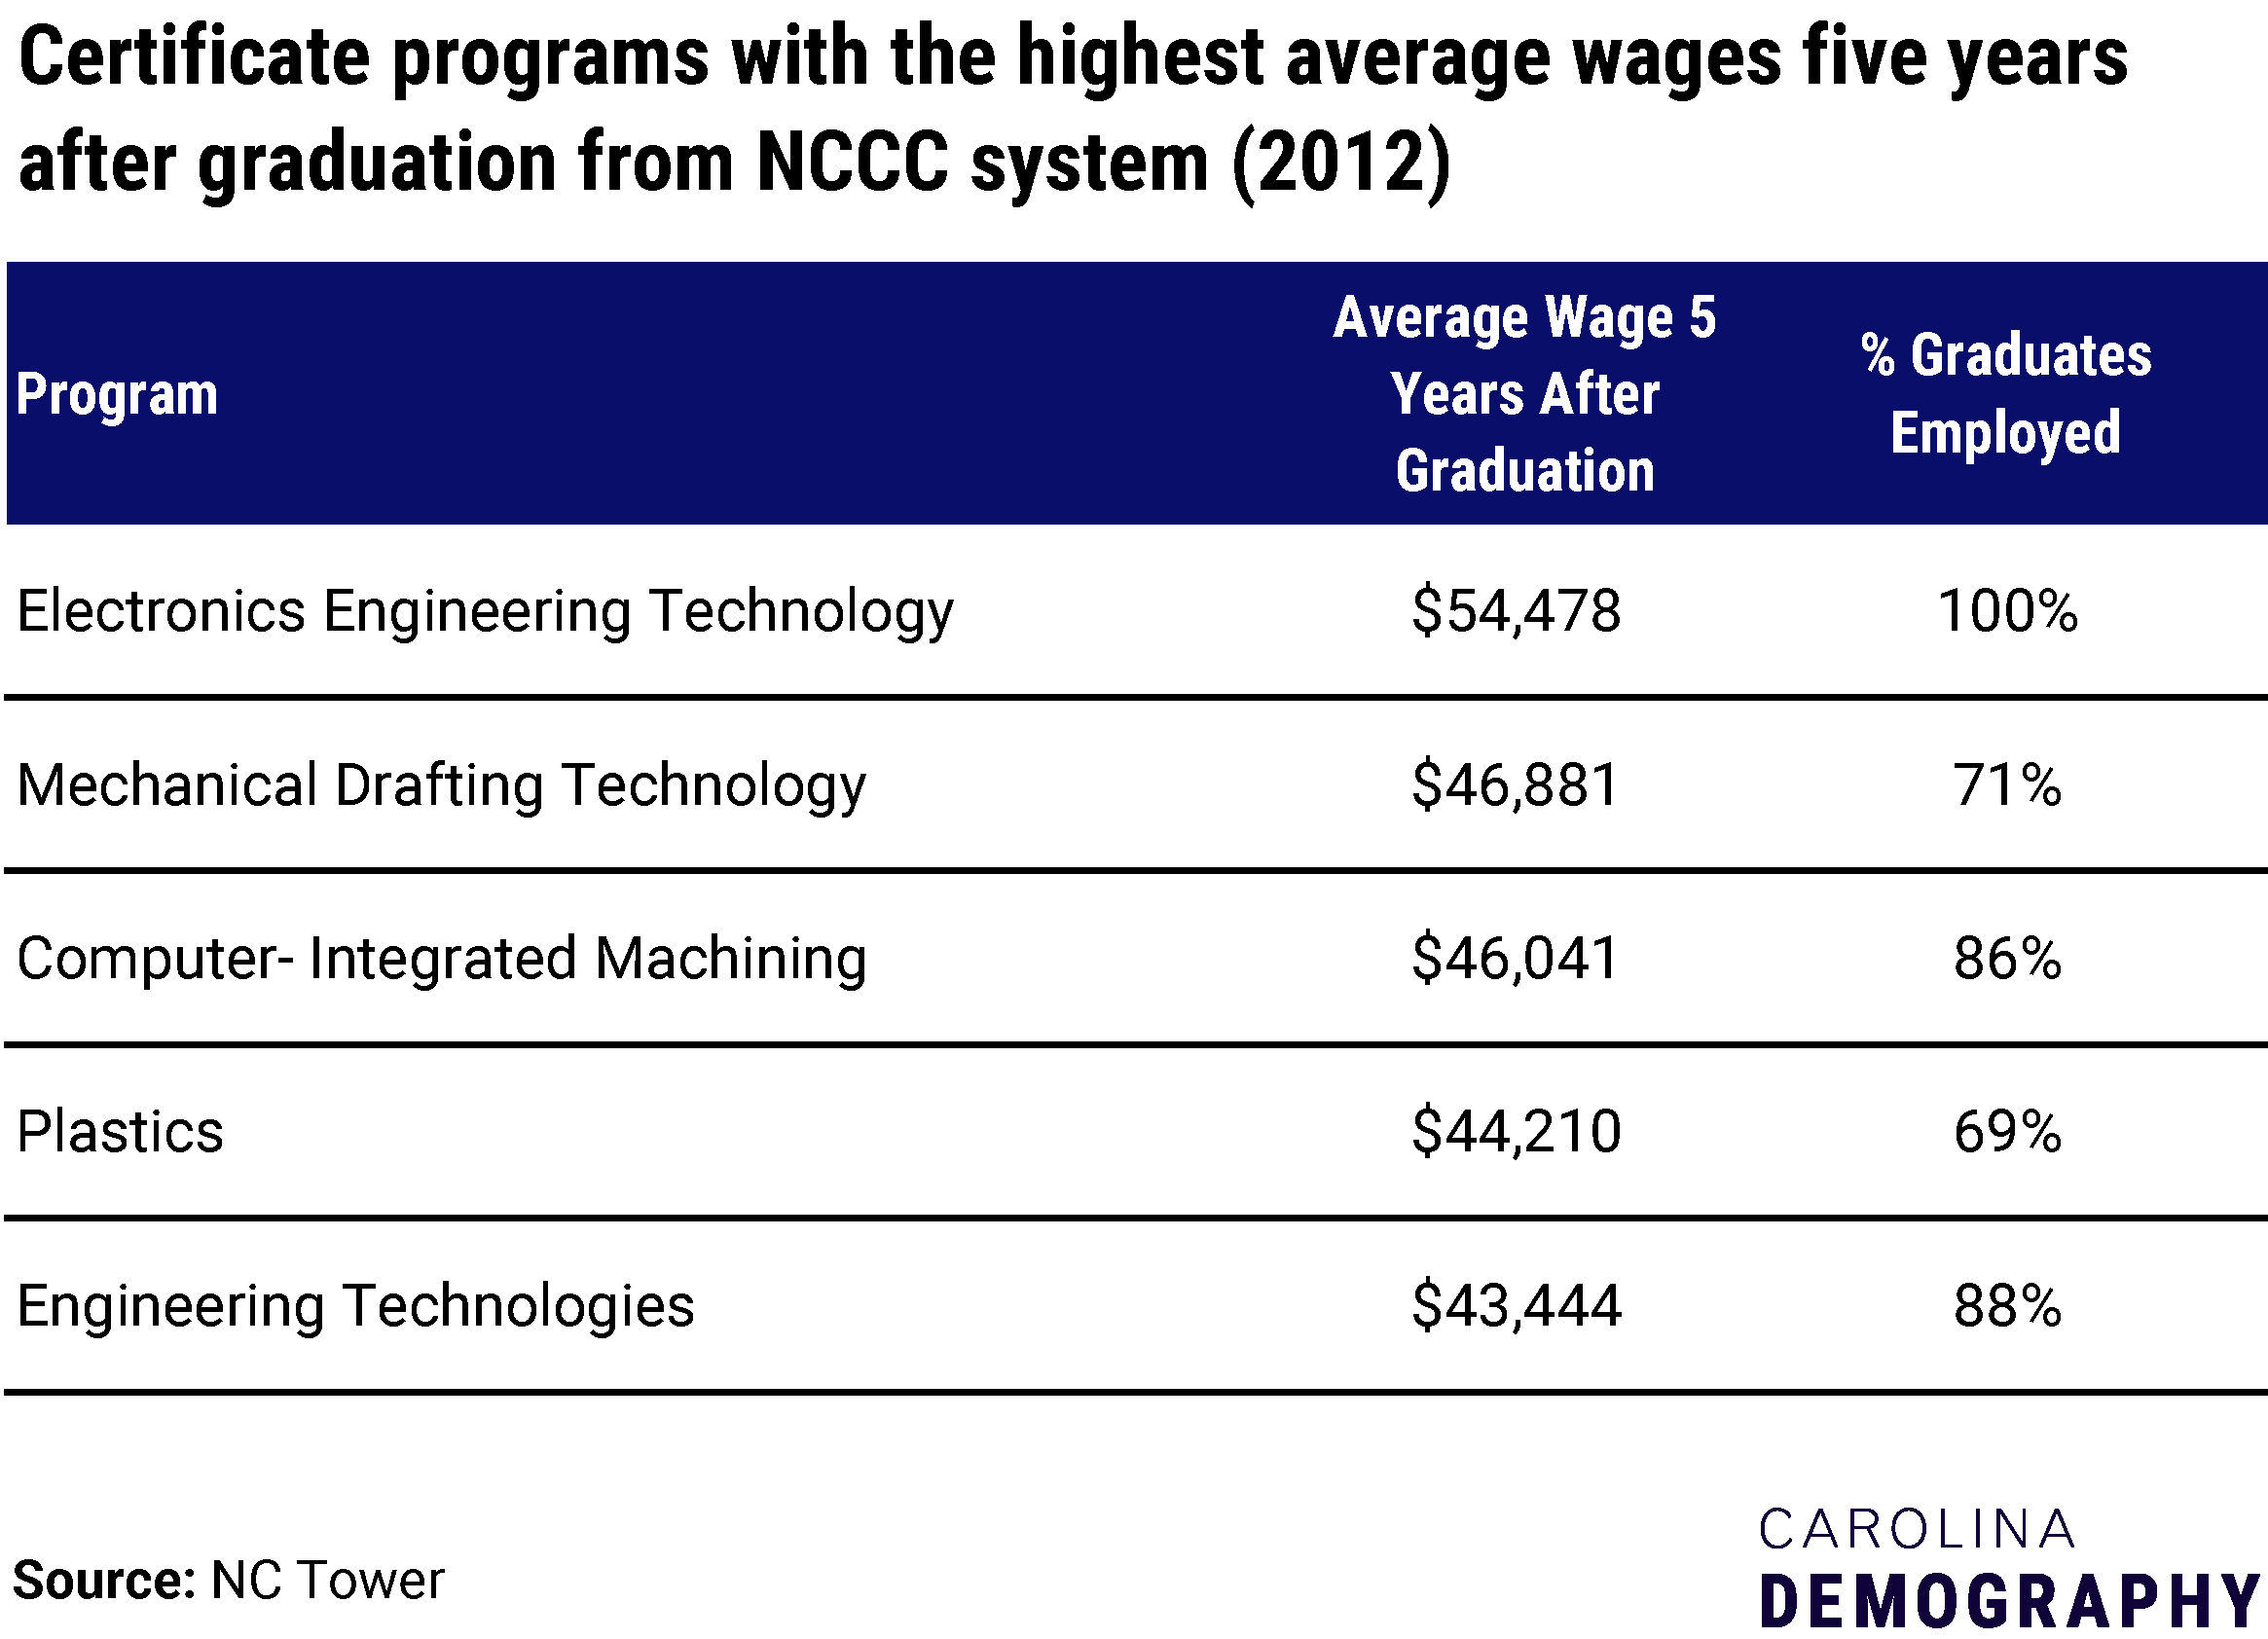 Certificate program graduates with the highest average wages five years after graduation, NCCC system schools (2012)